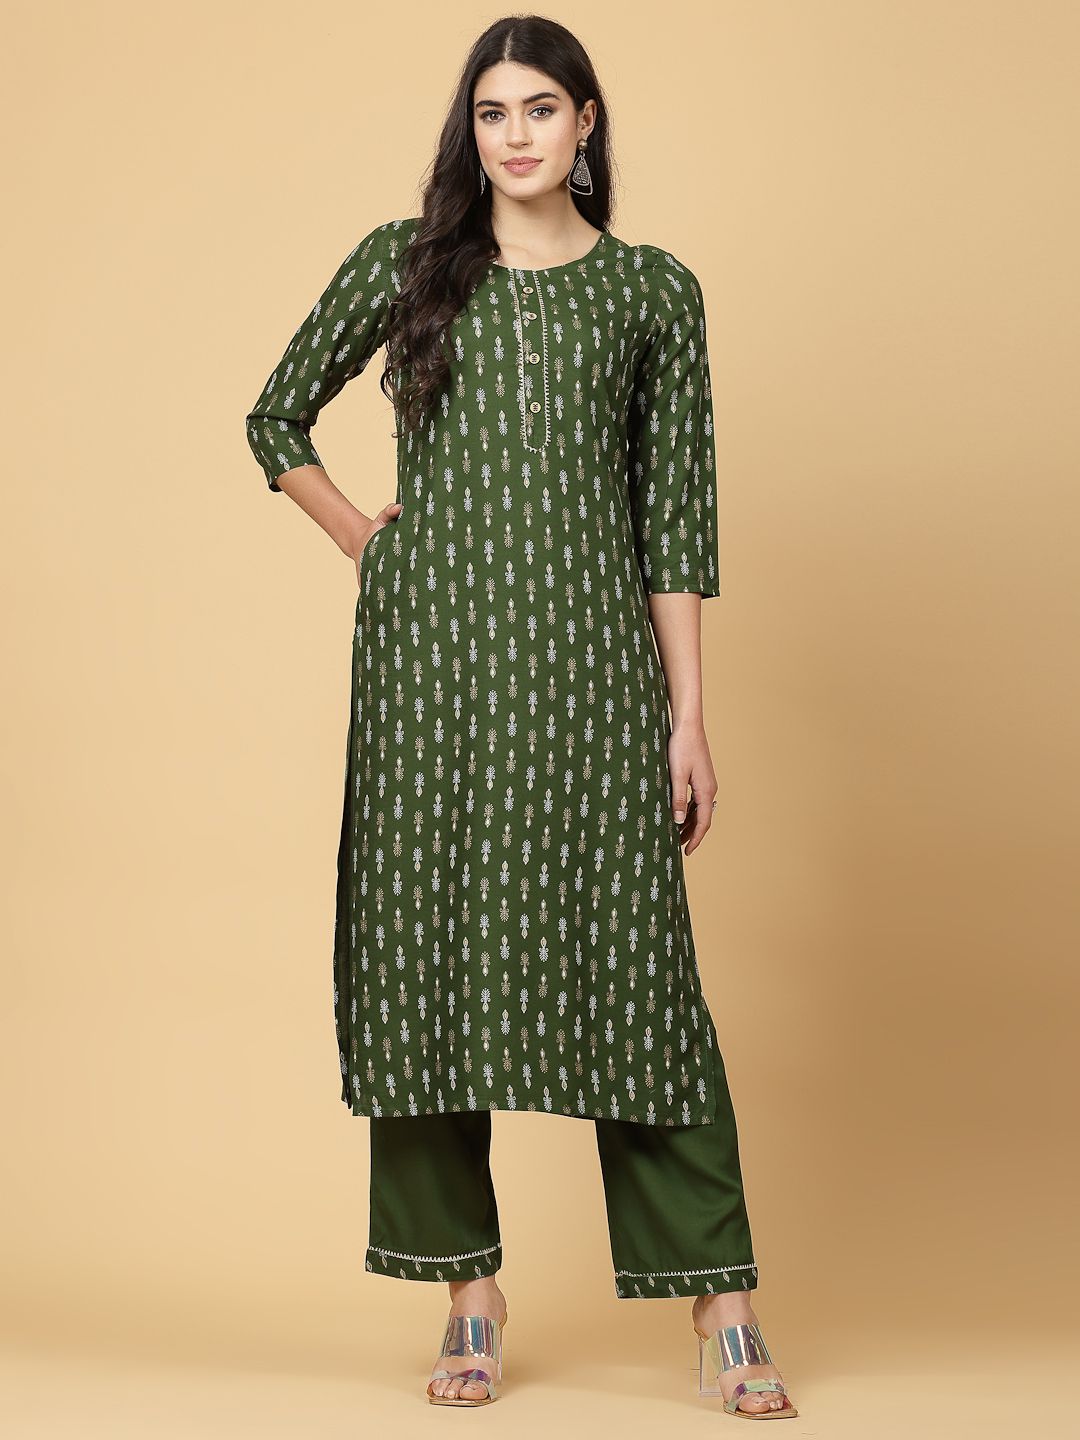     			Pistaa Viscose Printed Kurti With Palazzo Women's Stitched Salwar Suit - Green ( Pack of 1 )